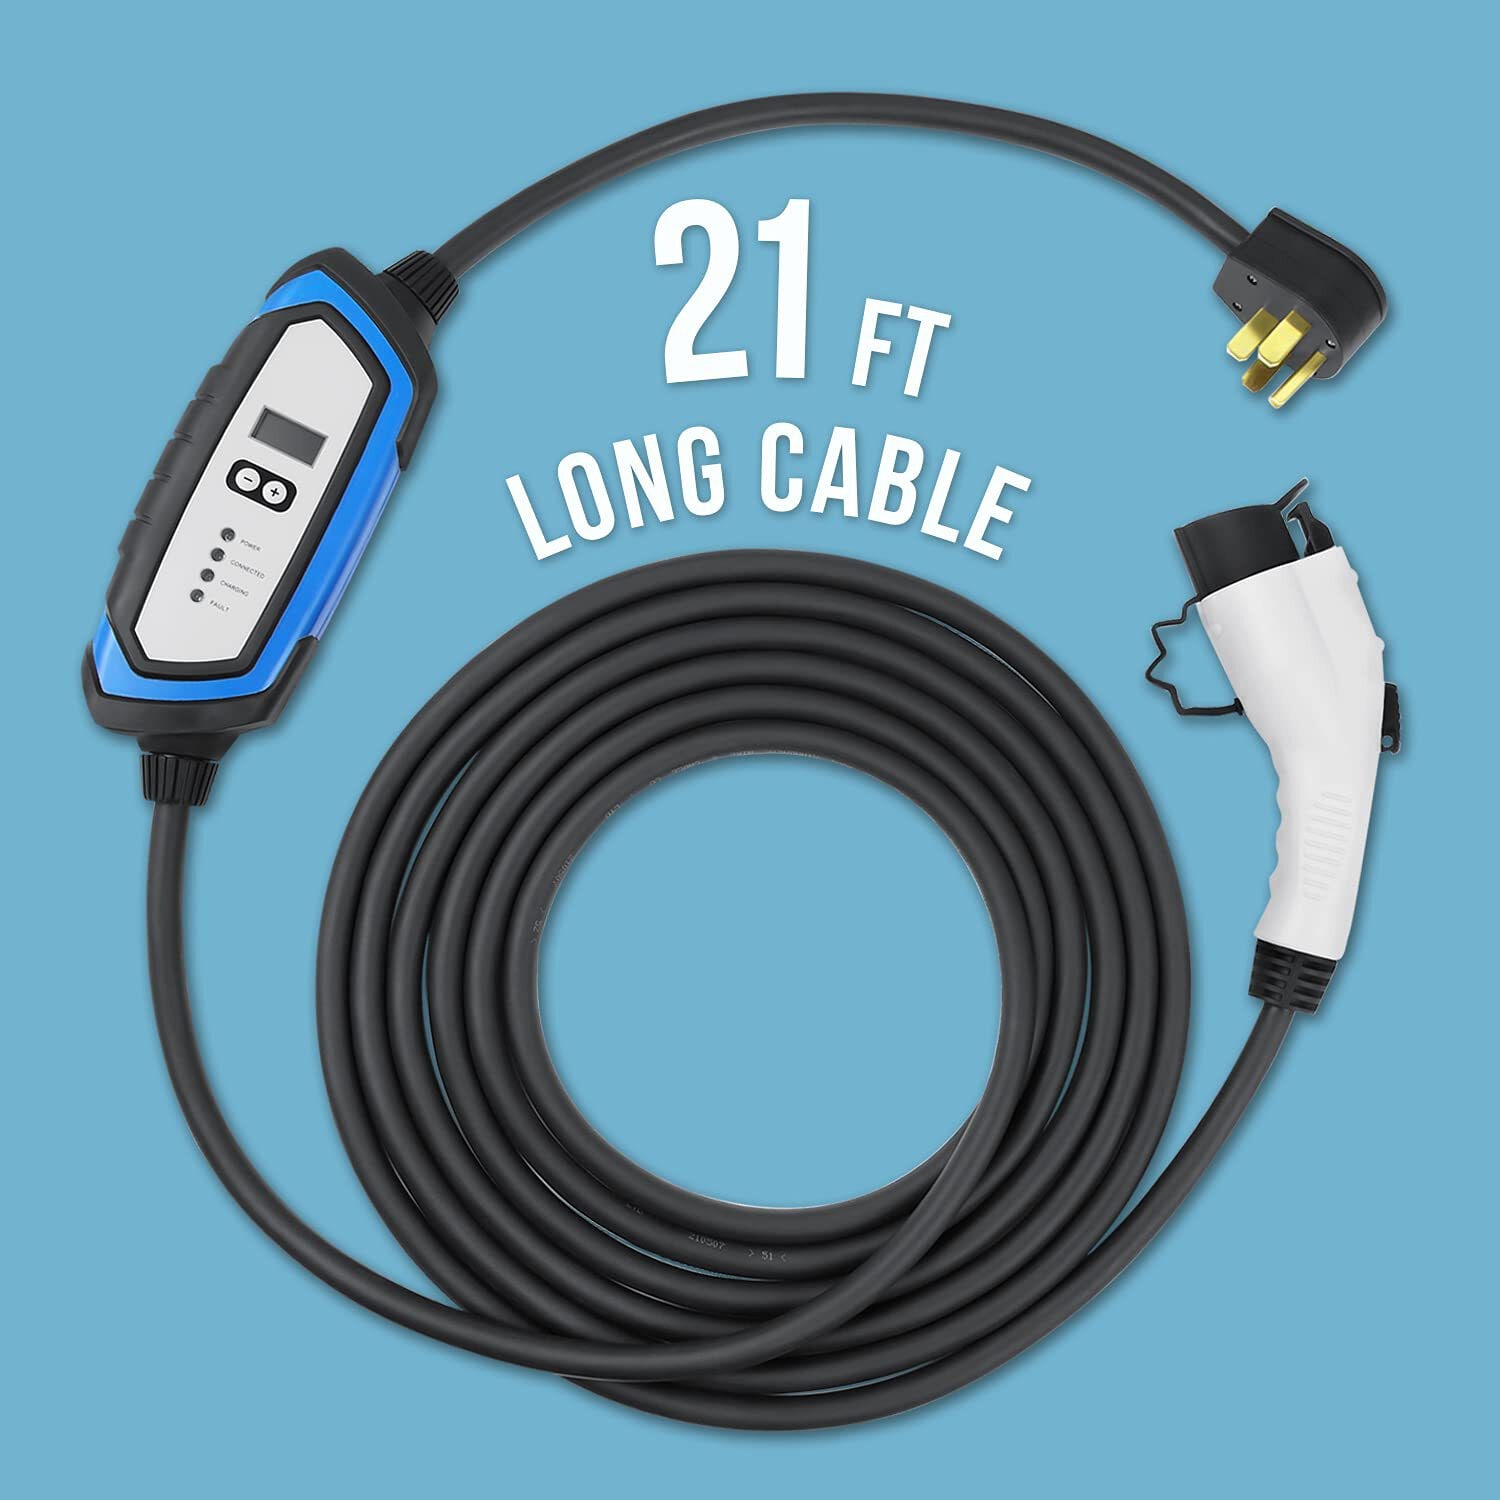 Multicore Cable for EV Car 32A Type 1 Type2 Charging Cable - China EV  Charging Station Cable Manufacturer, Type2 to Type2 Female Plug EV Charging  Station